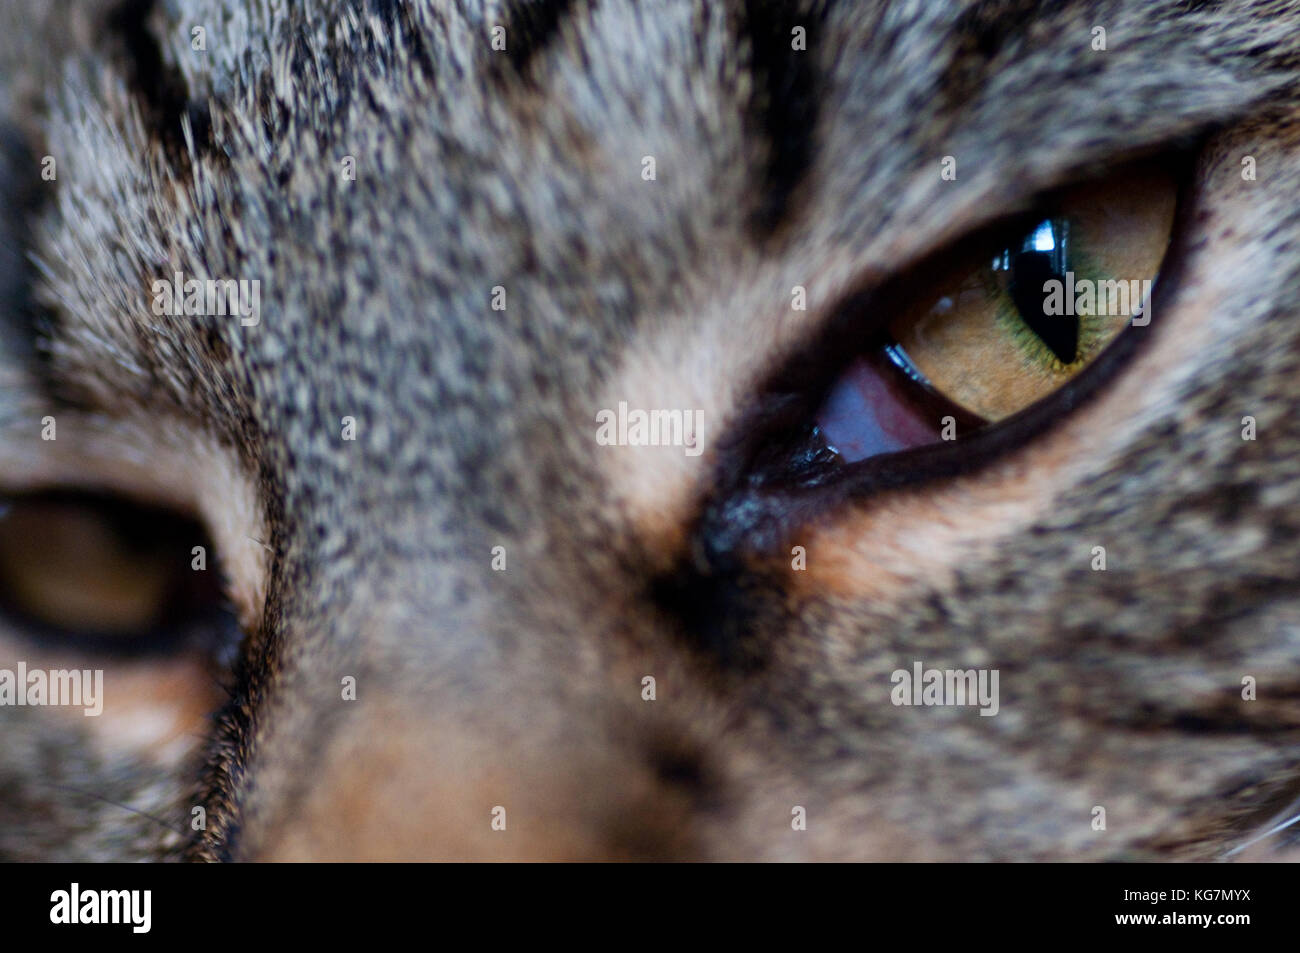 A close up of the eyes of a British short hair cat. Stock Photo